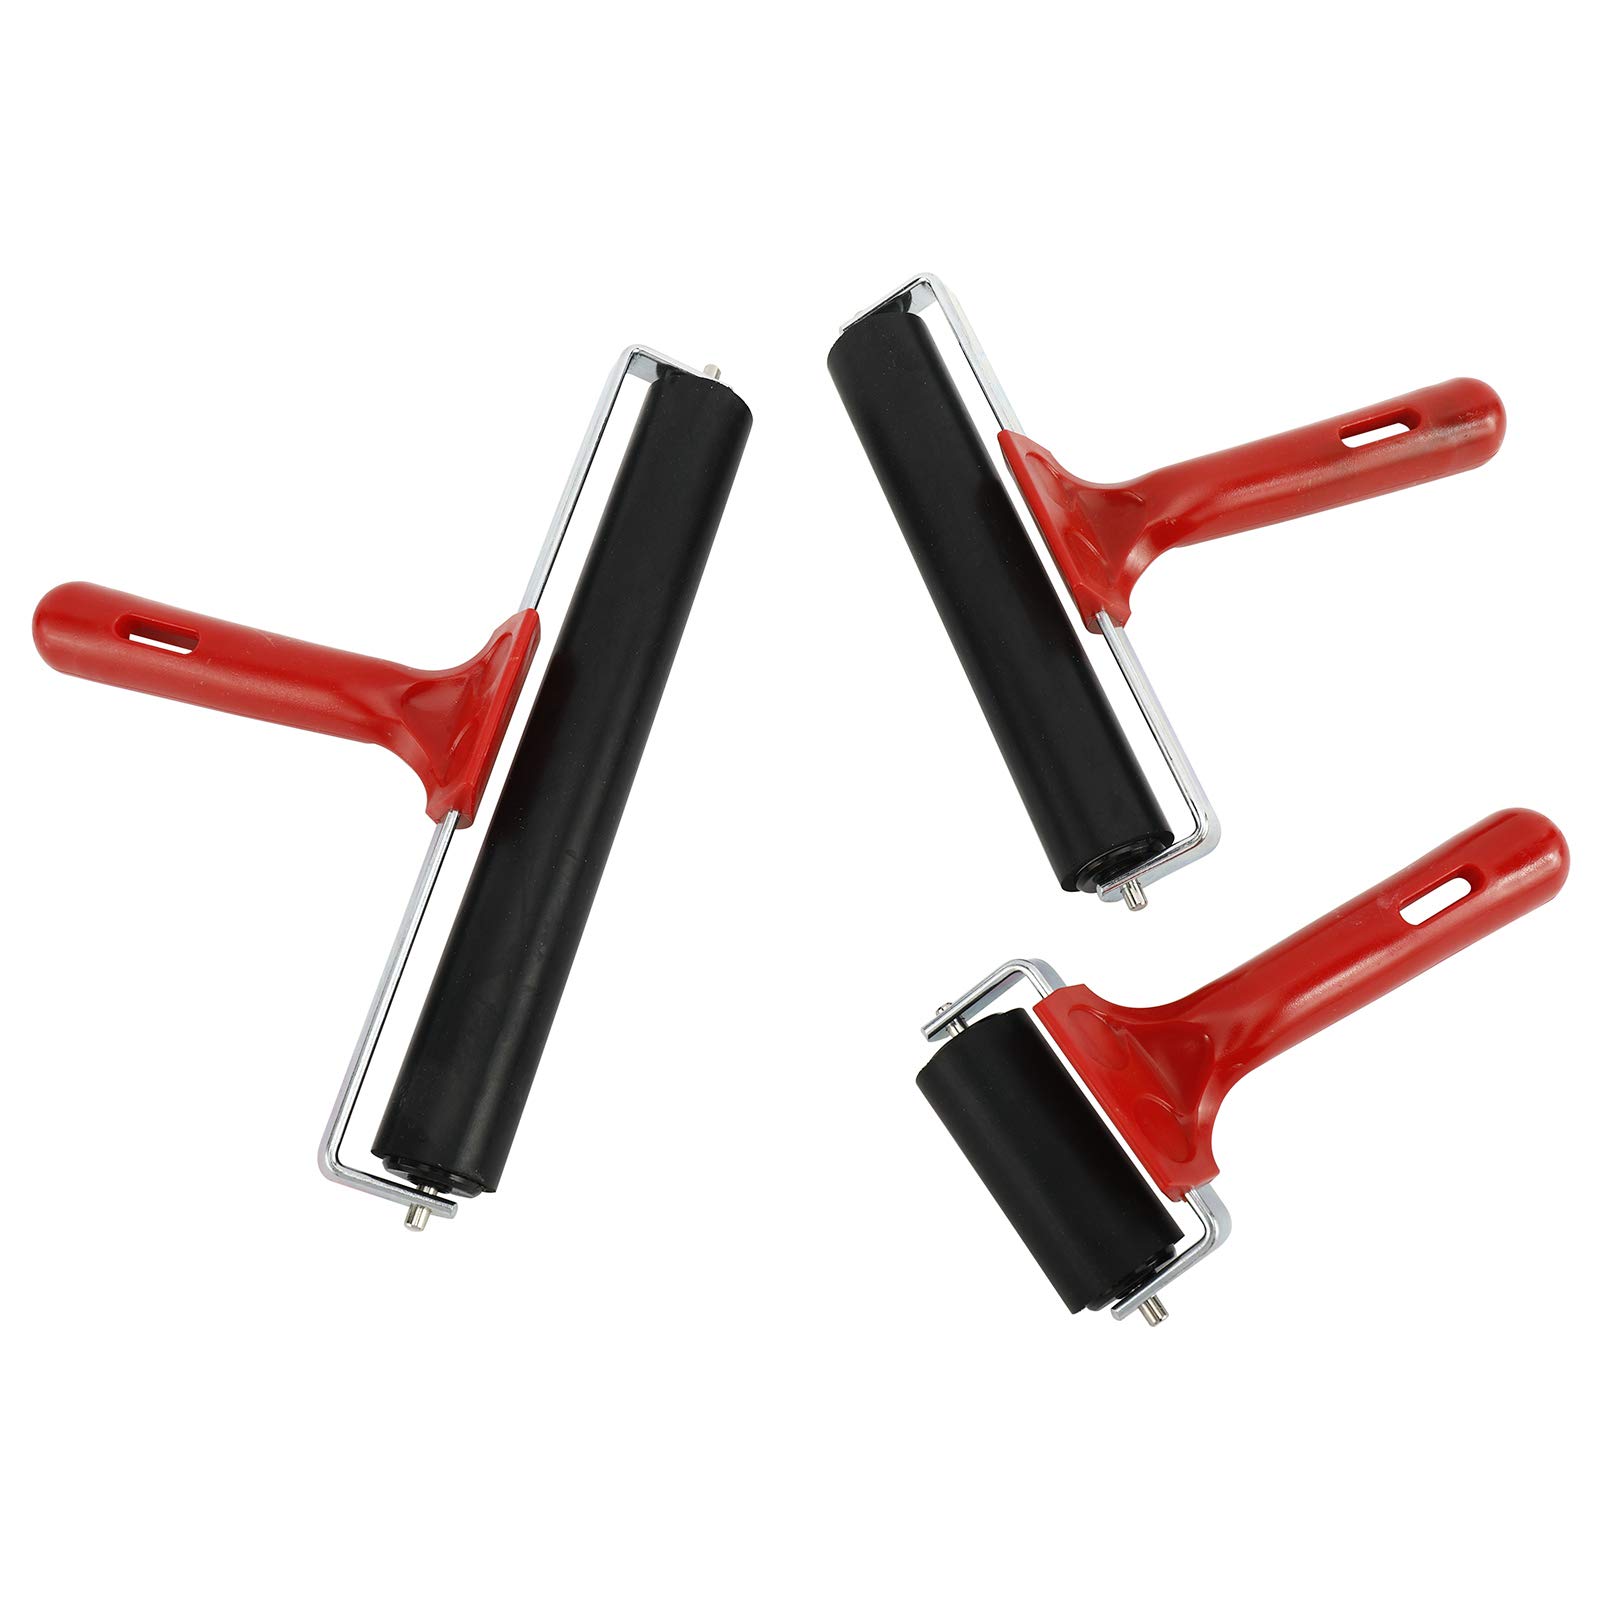 Artilife 3Pcs Rubber Rollers 2.4, 5.9 and 7.9 Rubber Brayer